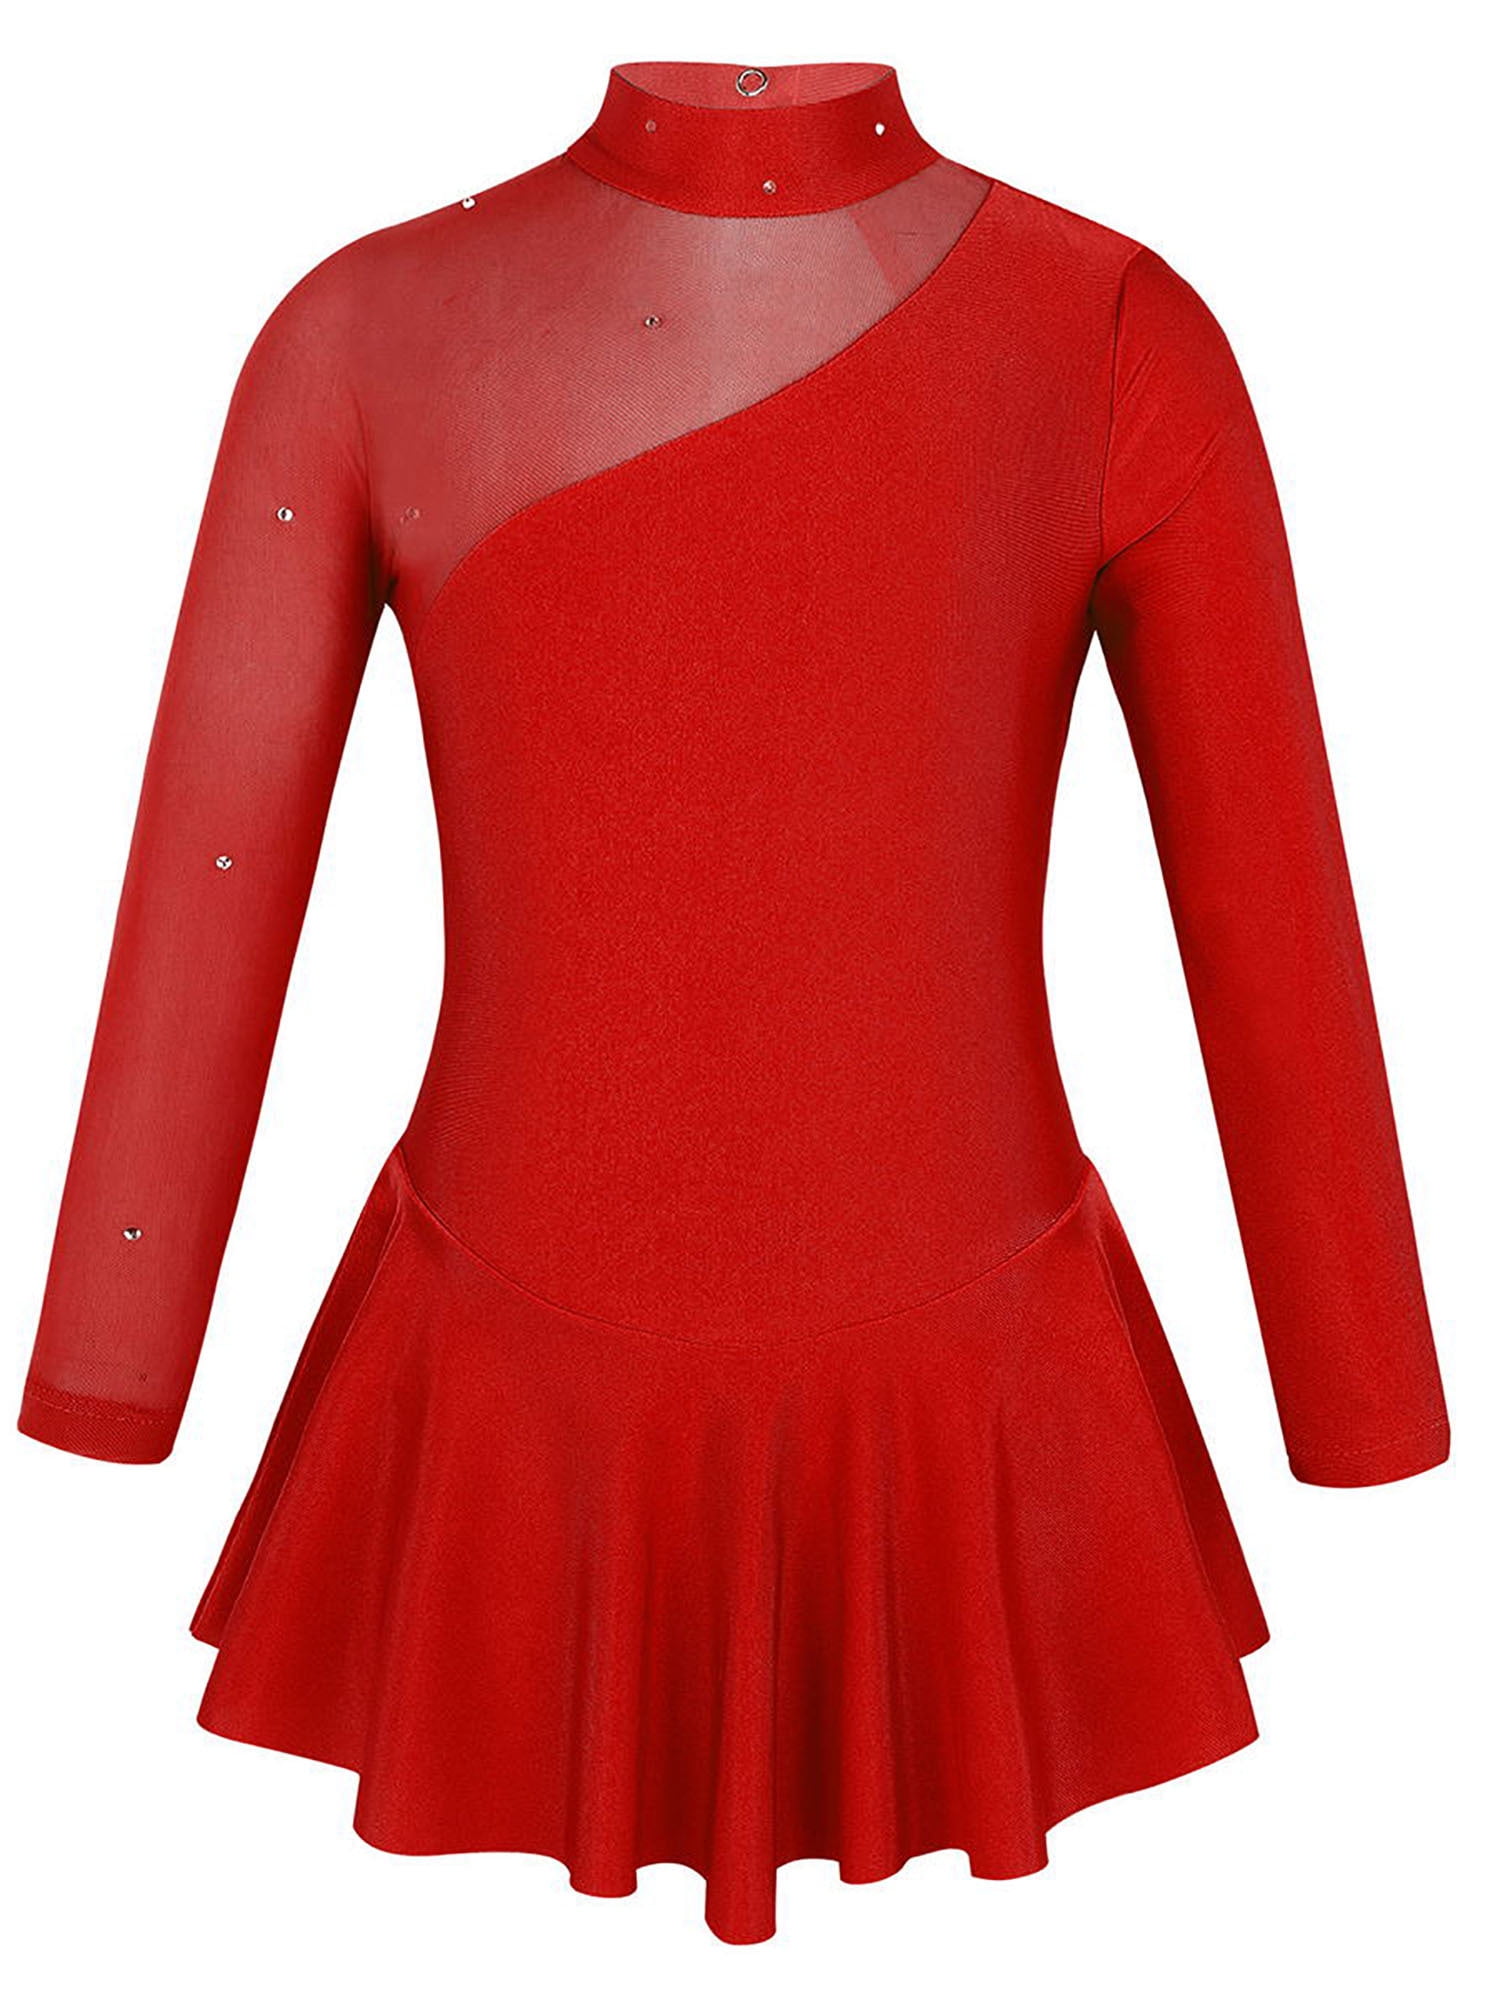 Details about   Gap cute baby girl Red Ruffle cord Long Sleeve dress dress w panty 3-6M 